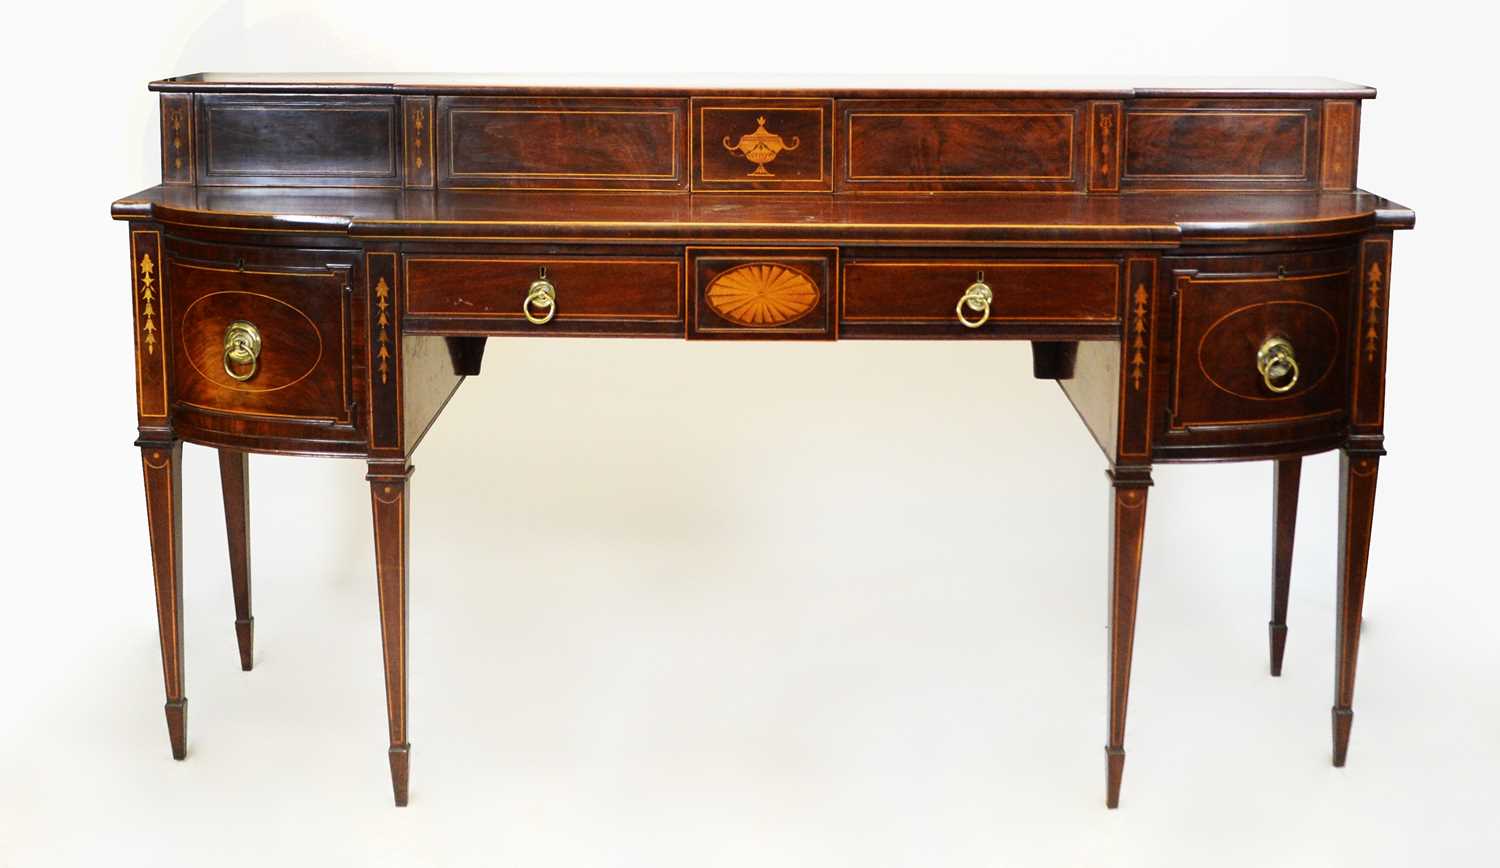 Lot 904 - A 19th Century mahogany and inlaid stage-back sideboard